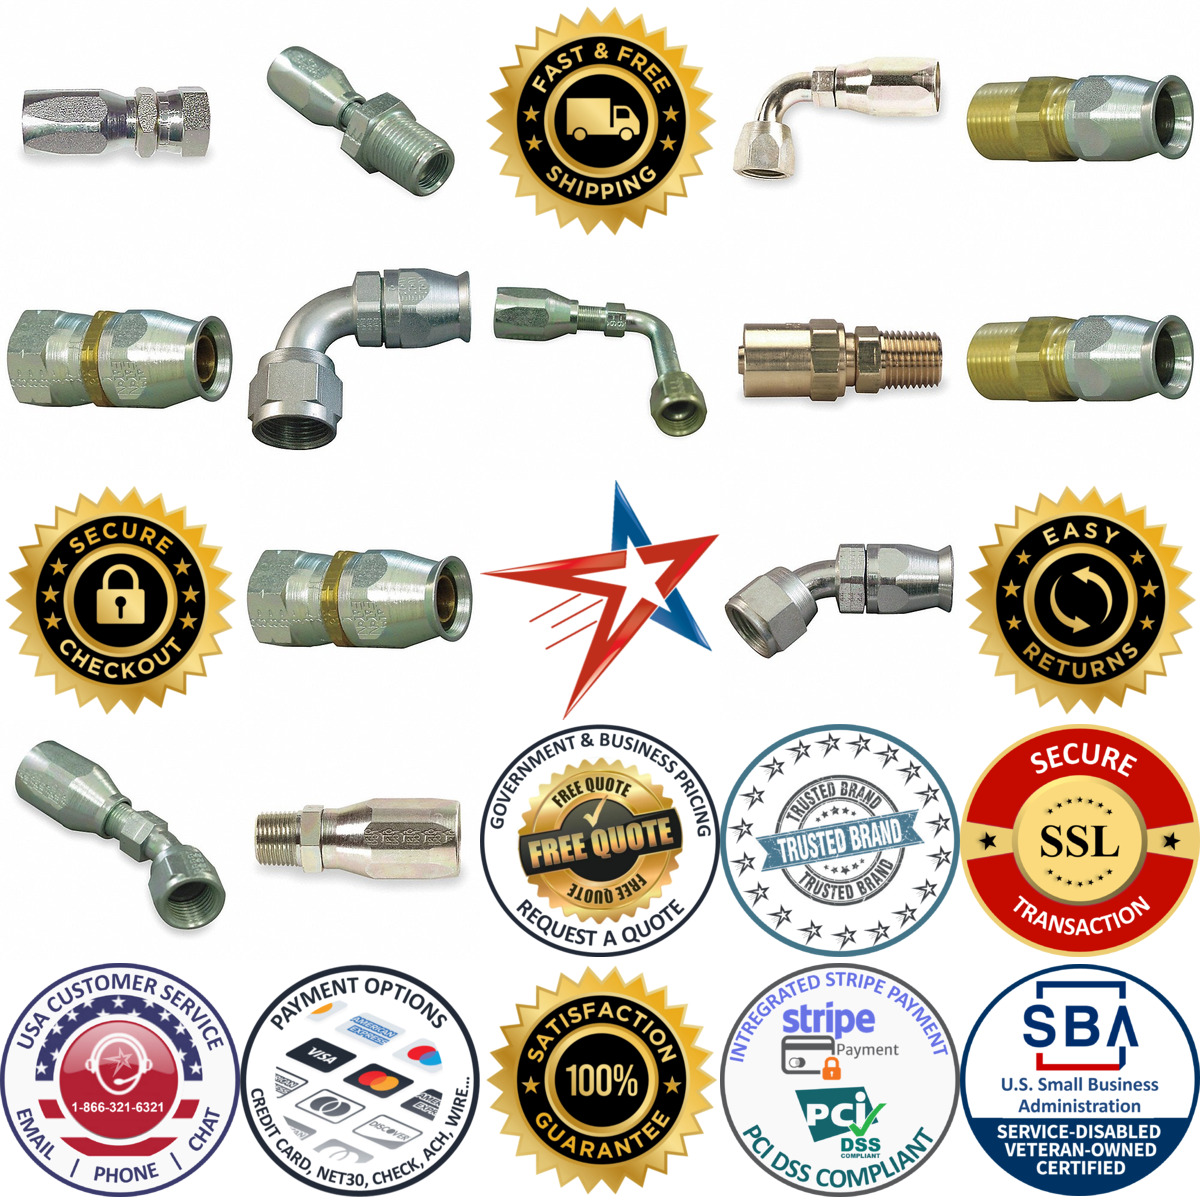 A selection of Reusable Hydraulic Hose Fittings products on GoVets